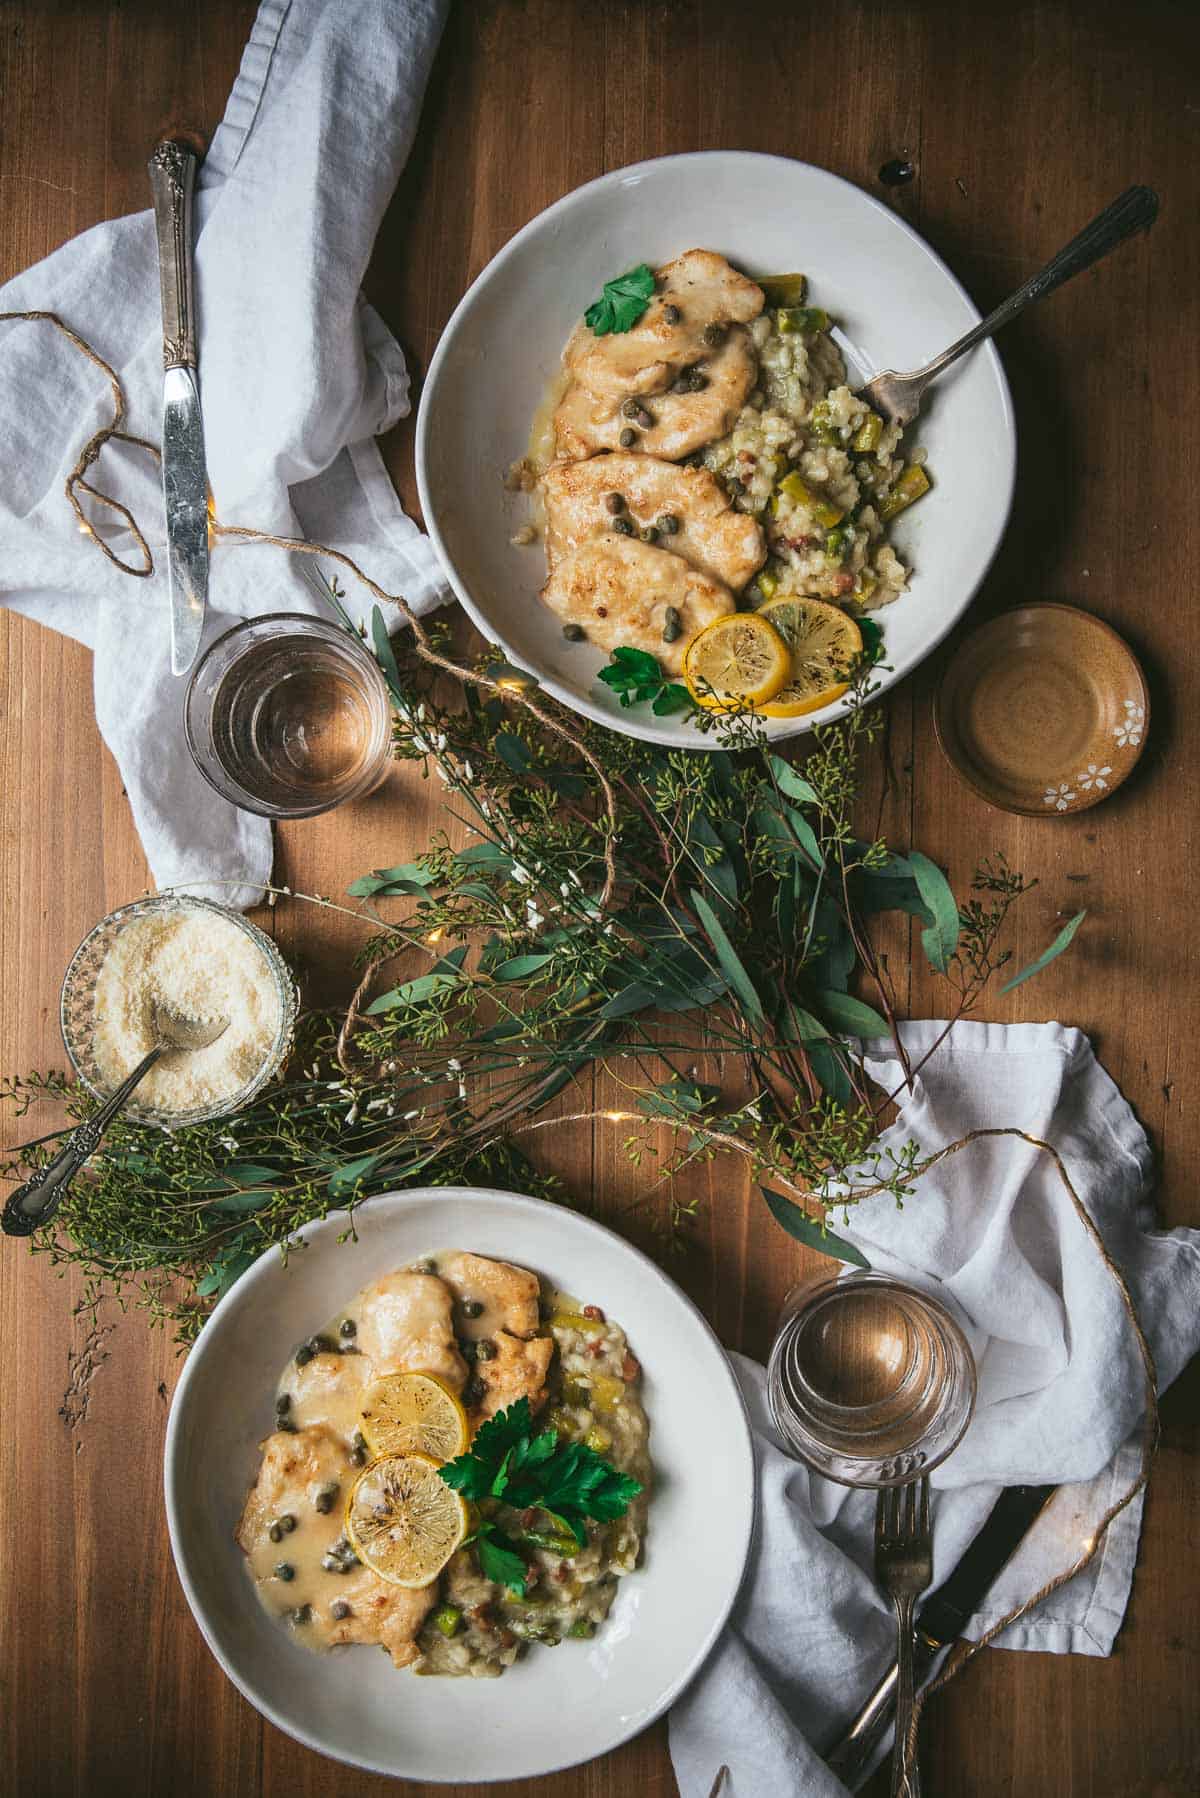 two servings of chicken piccata and risotto on plates with flowers and lights